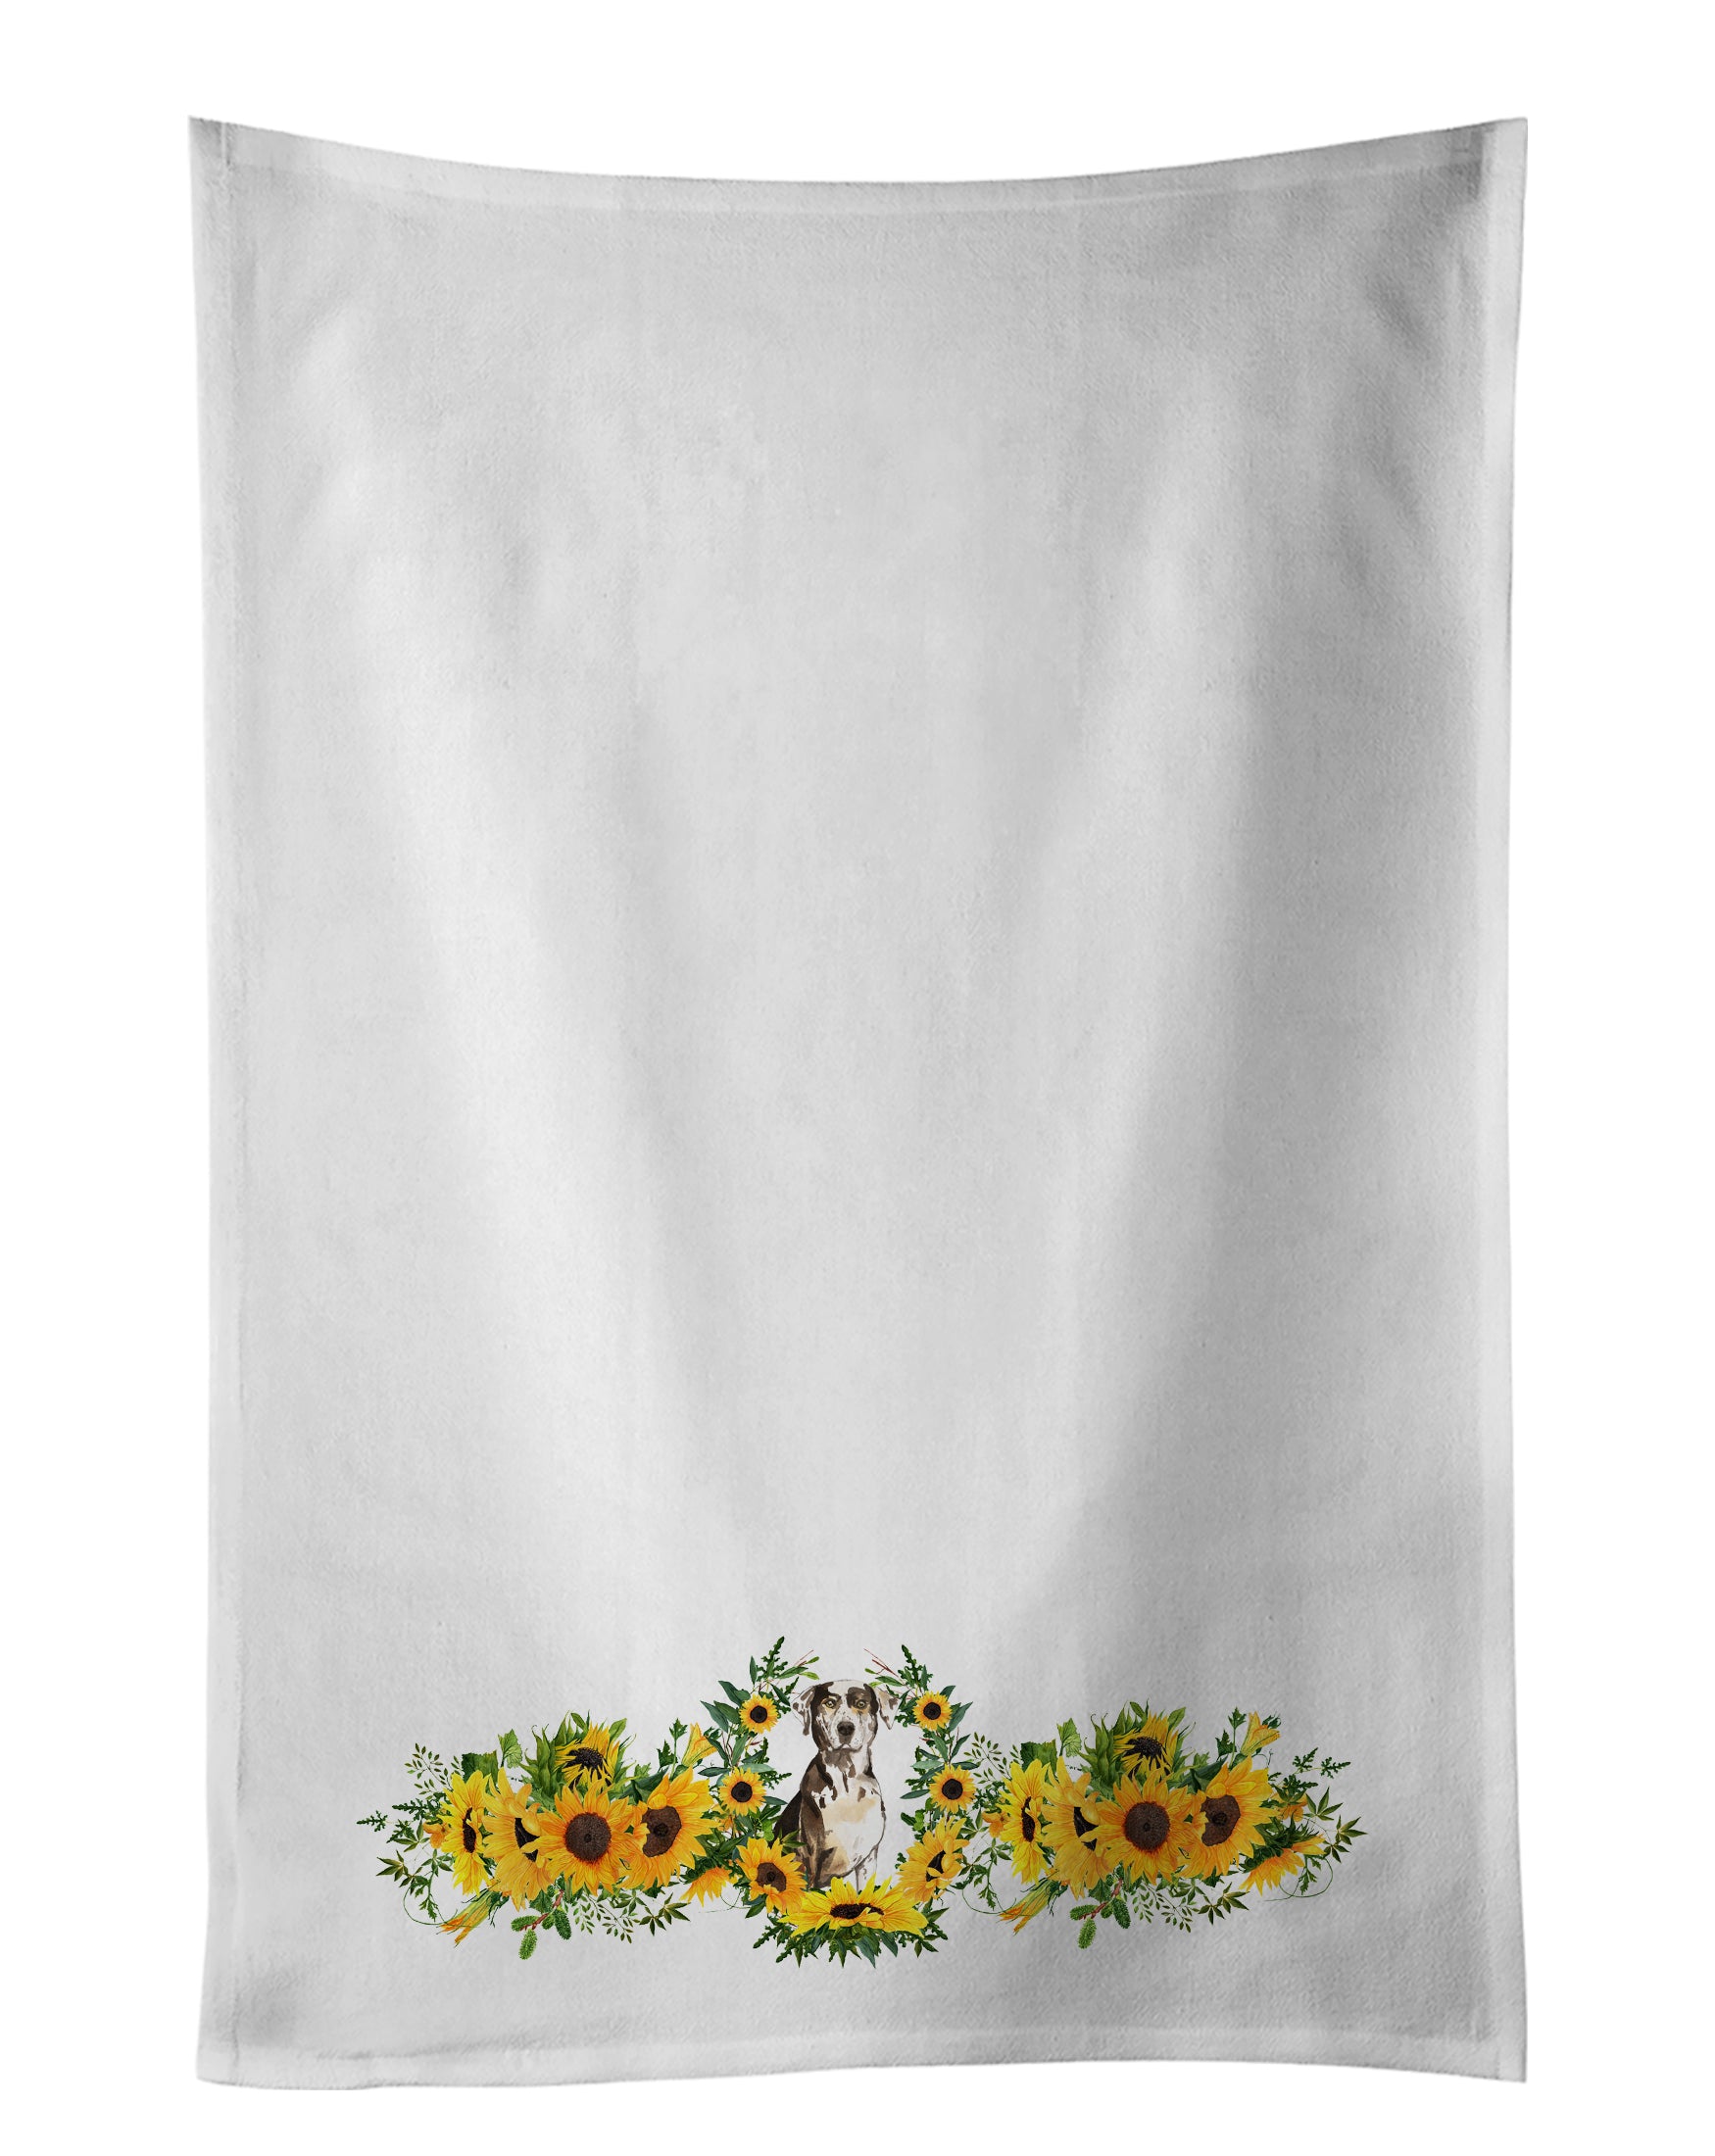 Buy this Catahoula Leopard Dog in Sunflowers White Kitchen Towel Set of 2